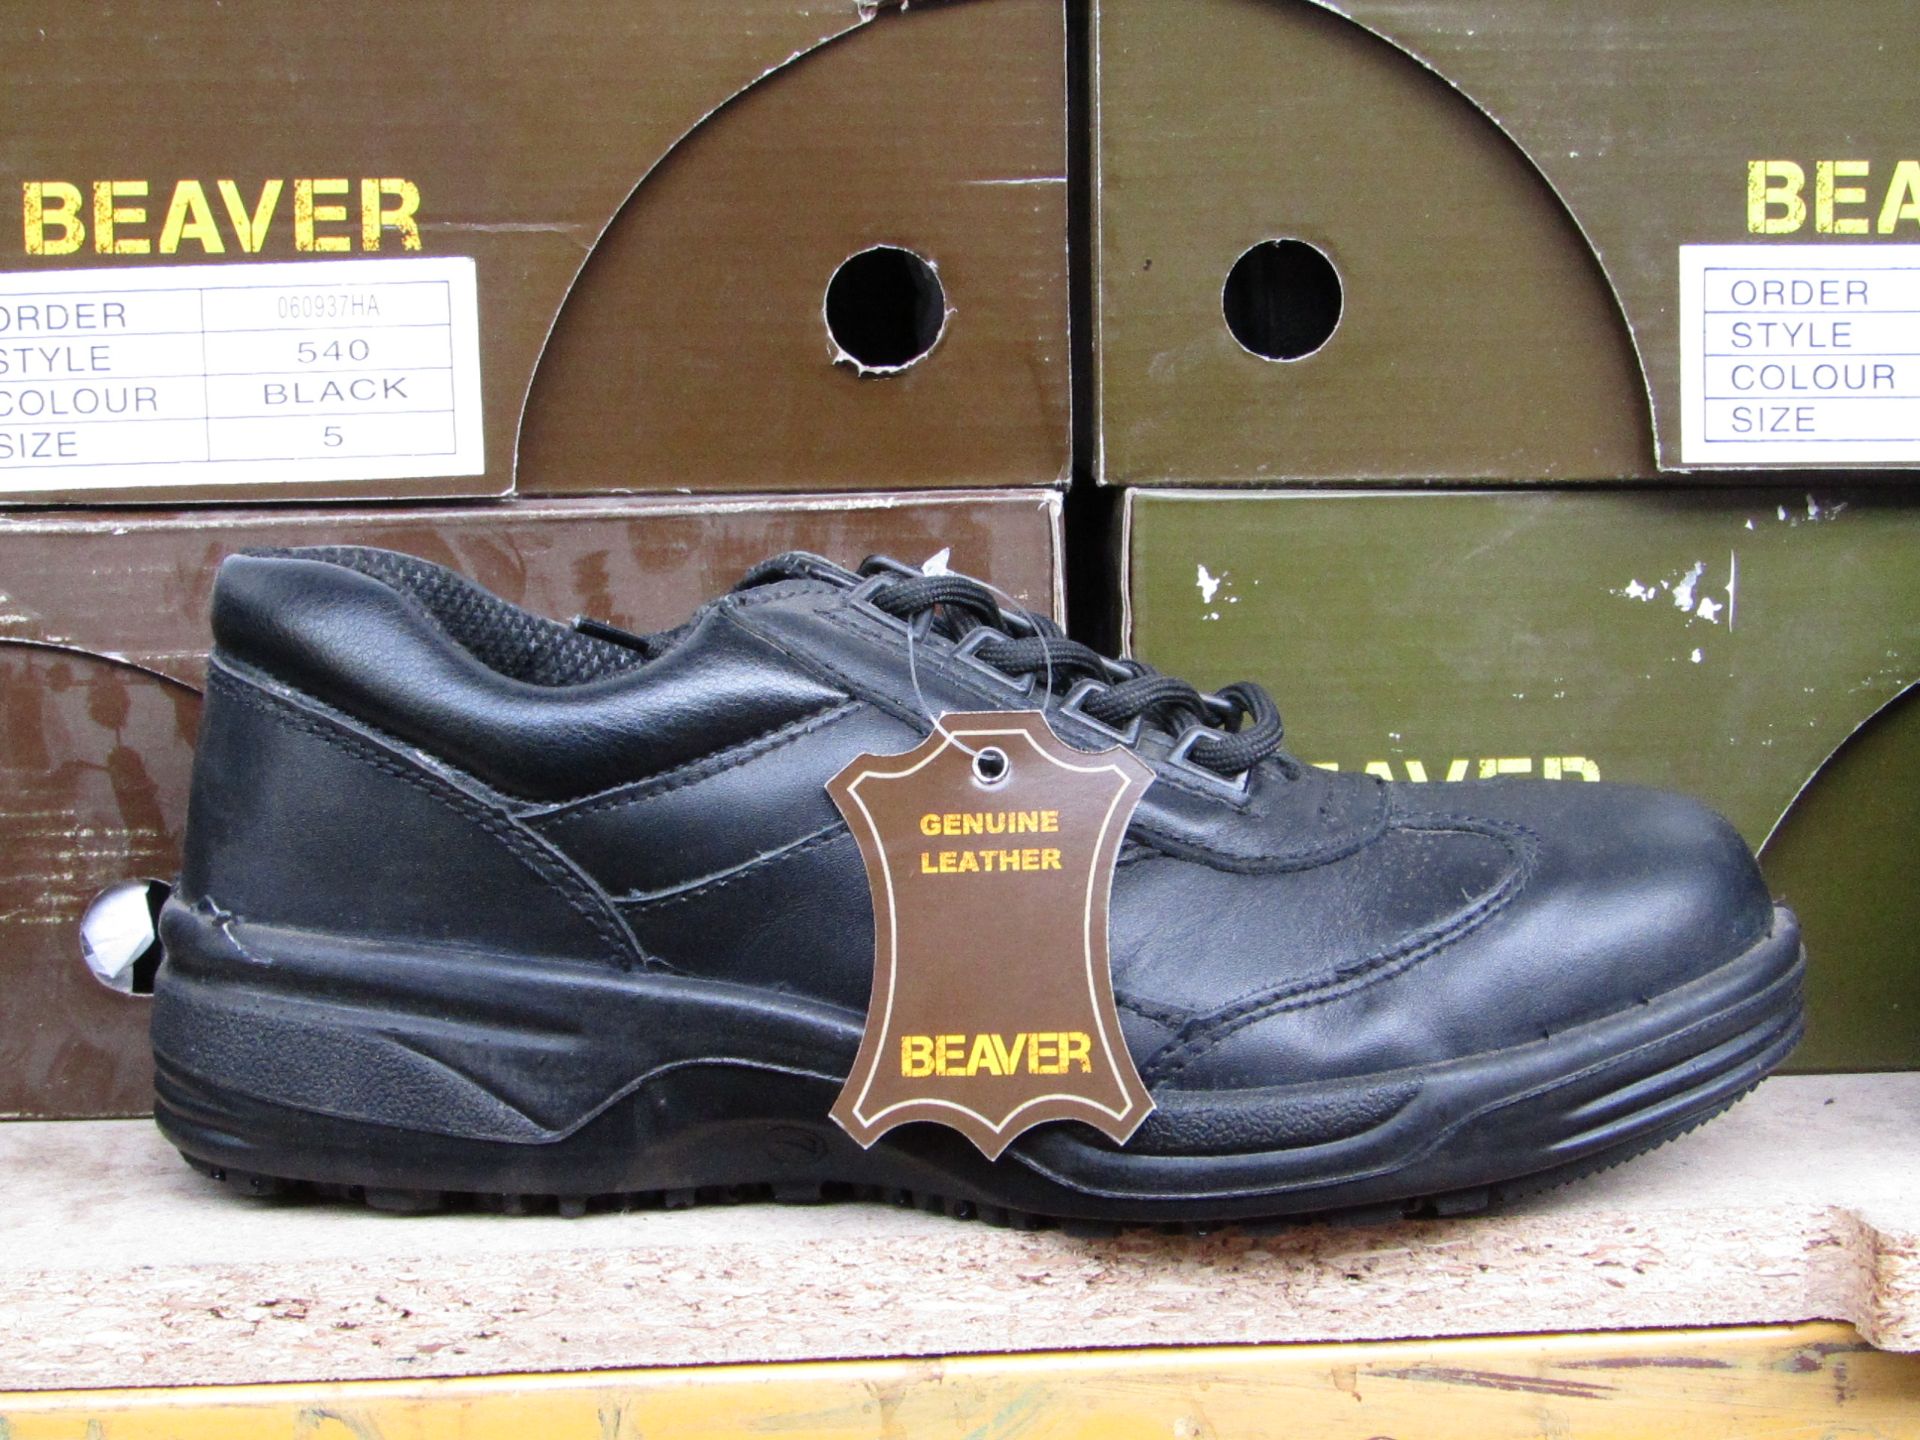 Beaver genuine Leather Safety Shoe Size 7. new and Boxed